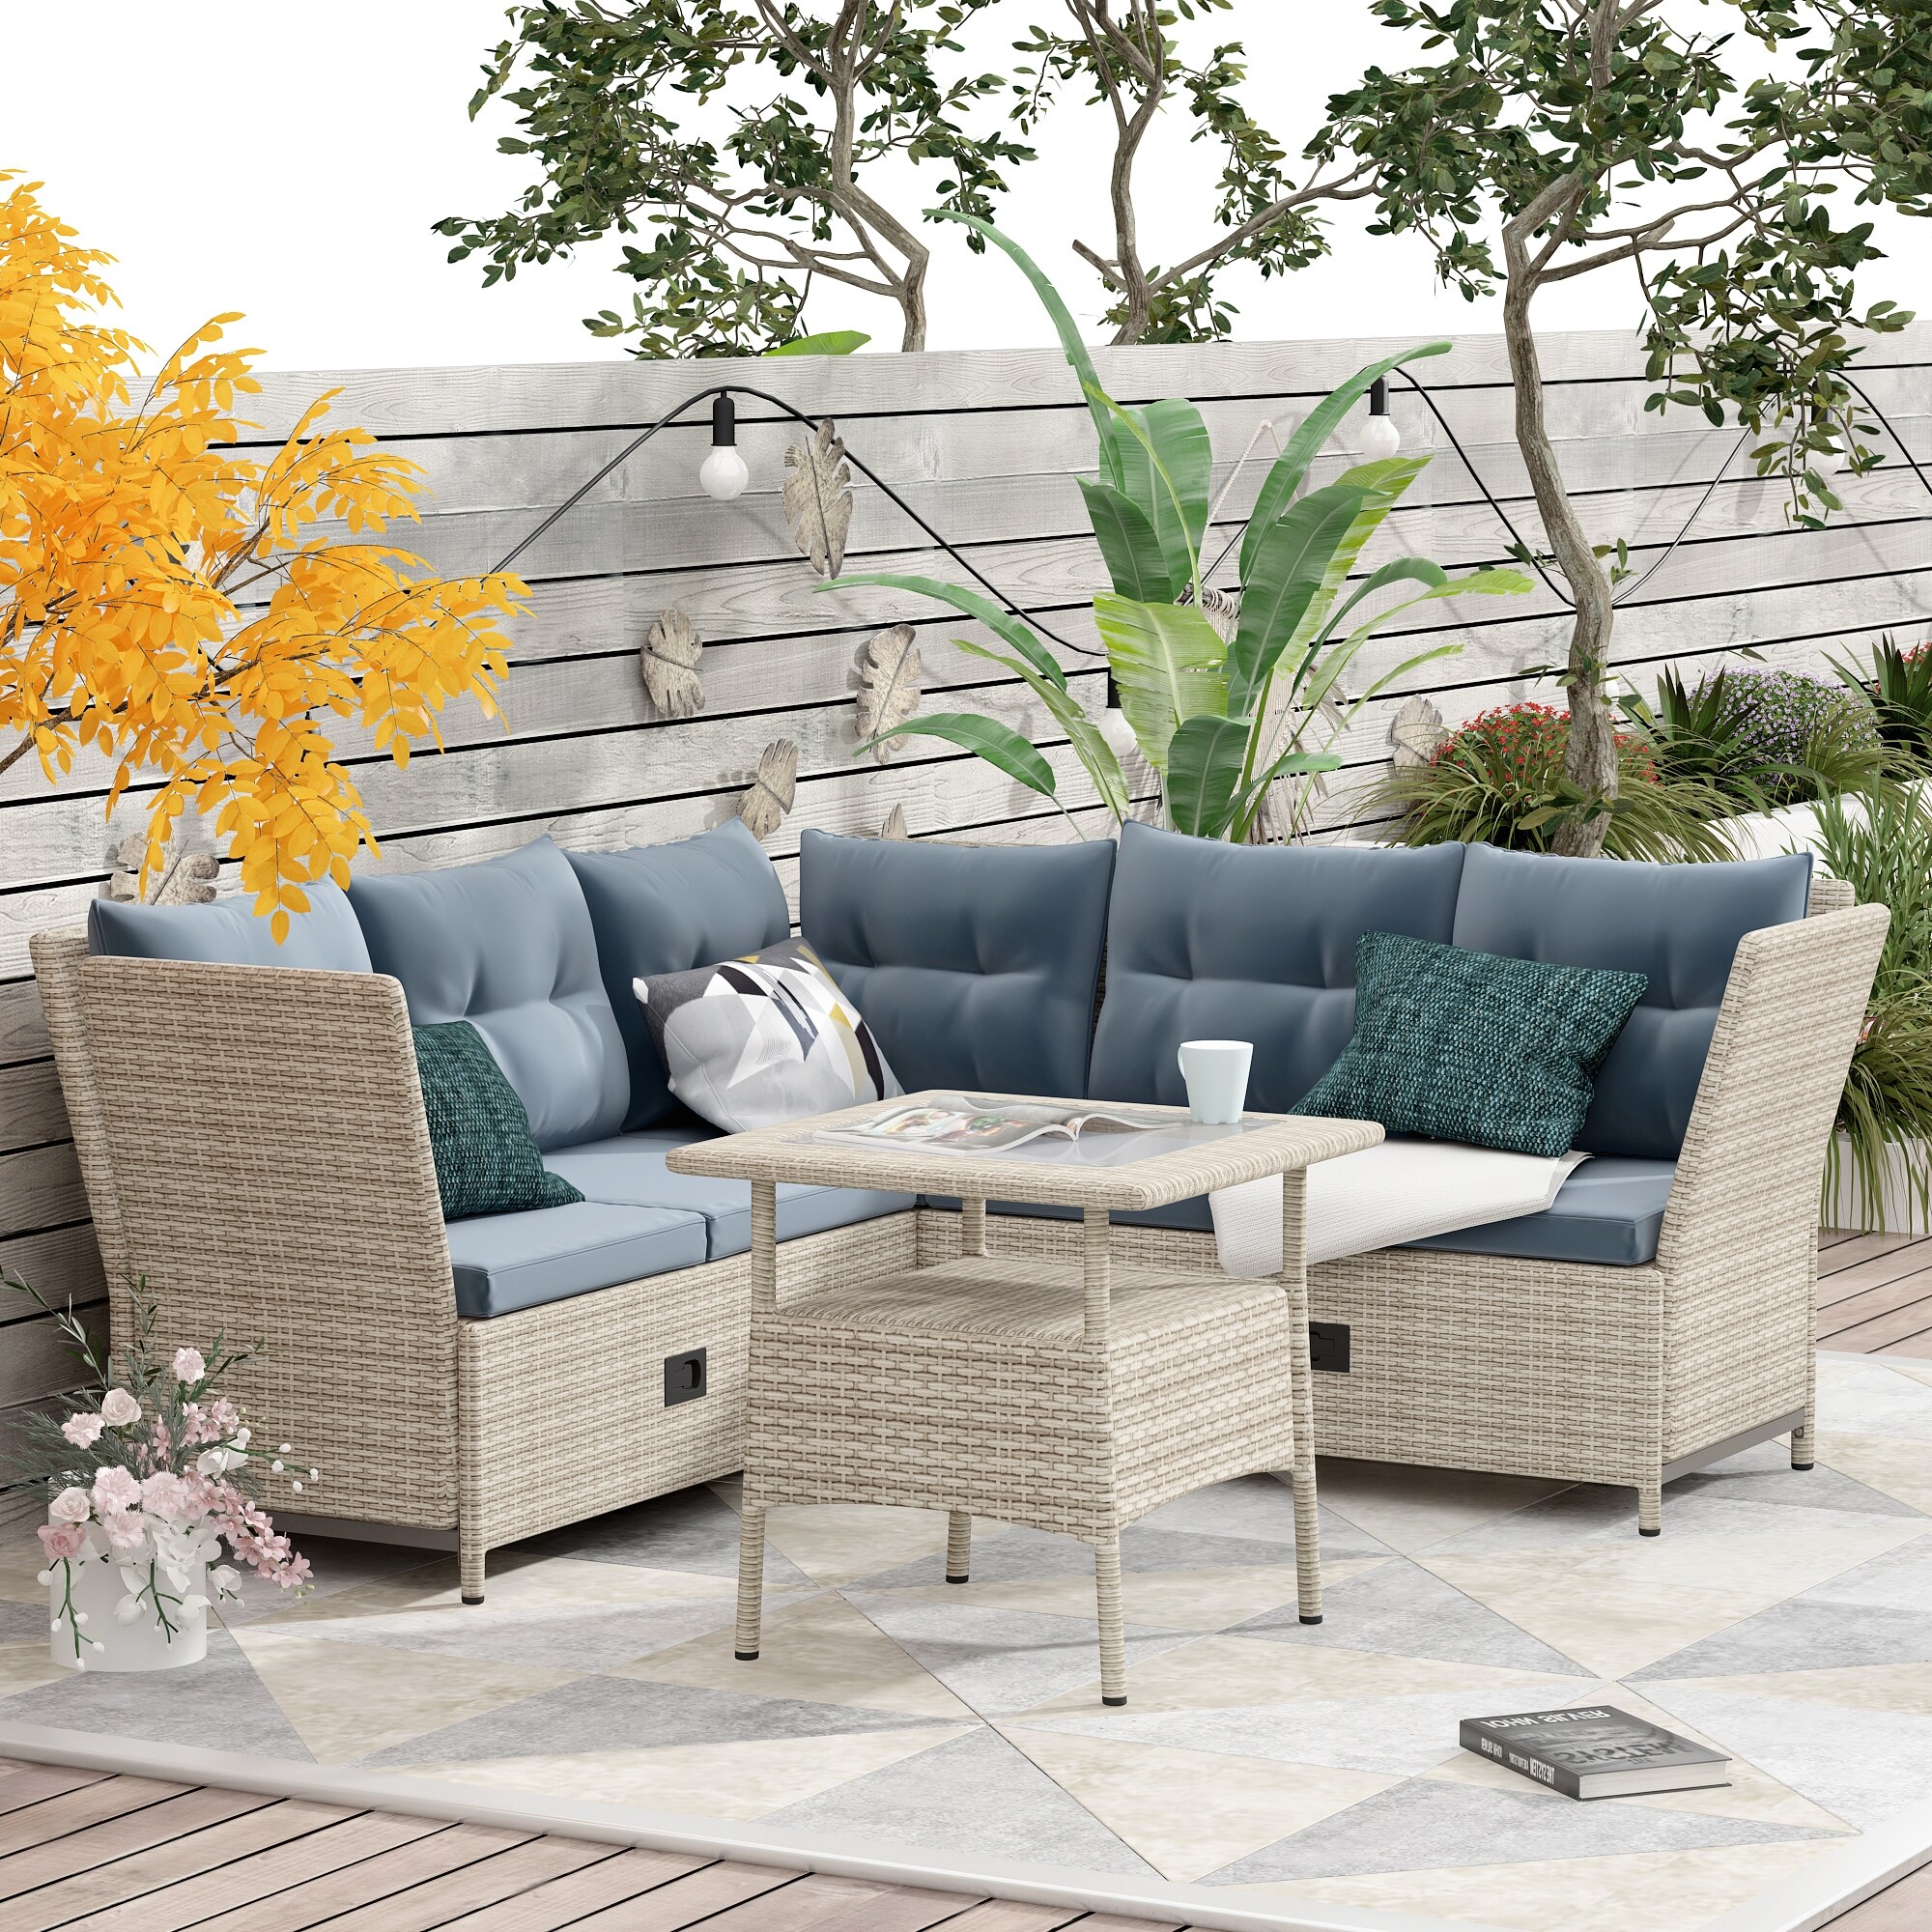 Outdoor Patio Sofa Set With Adjustable Side Back  Tempered Glass Table  All Weather Resistant Wicker  Grey Cushion